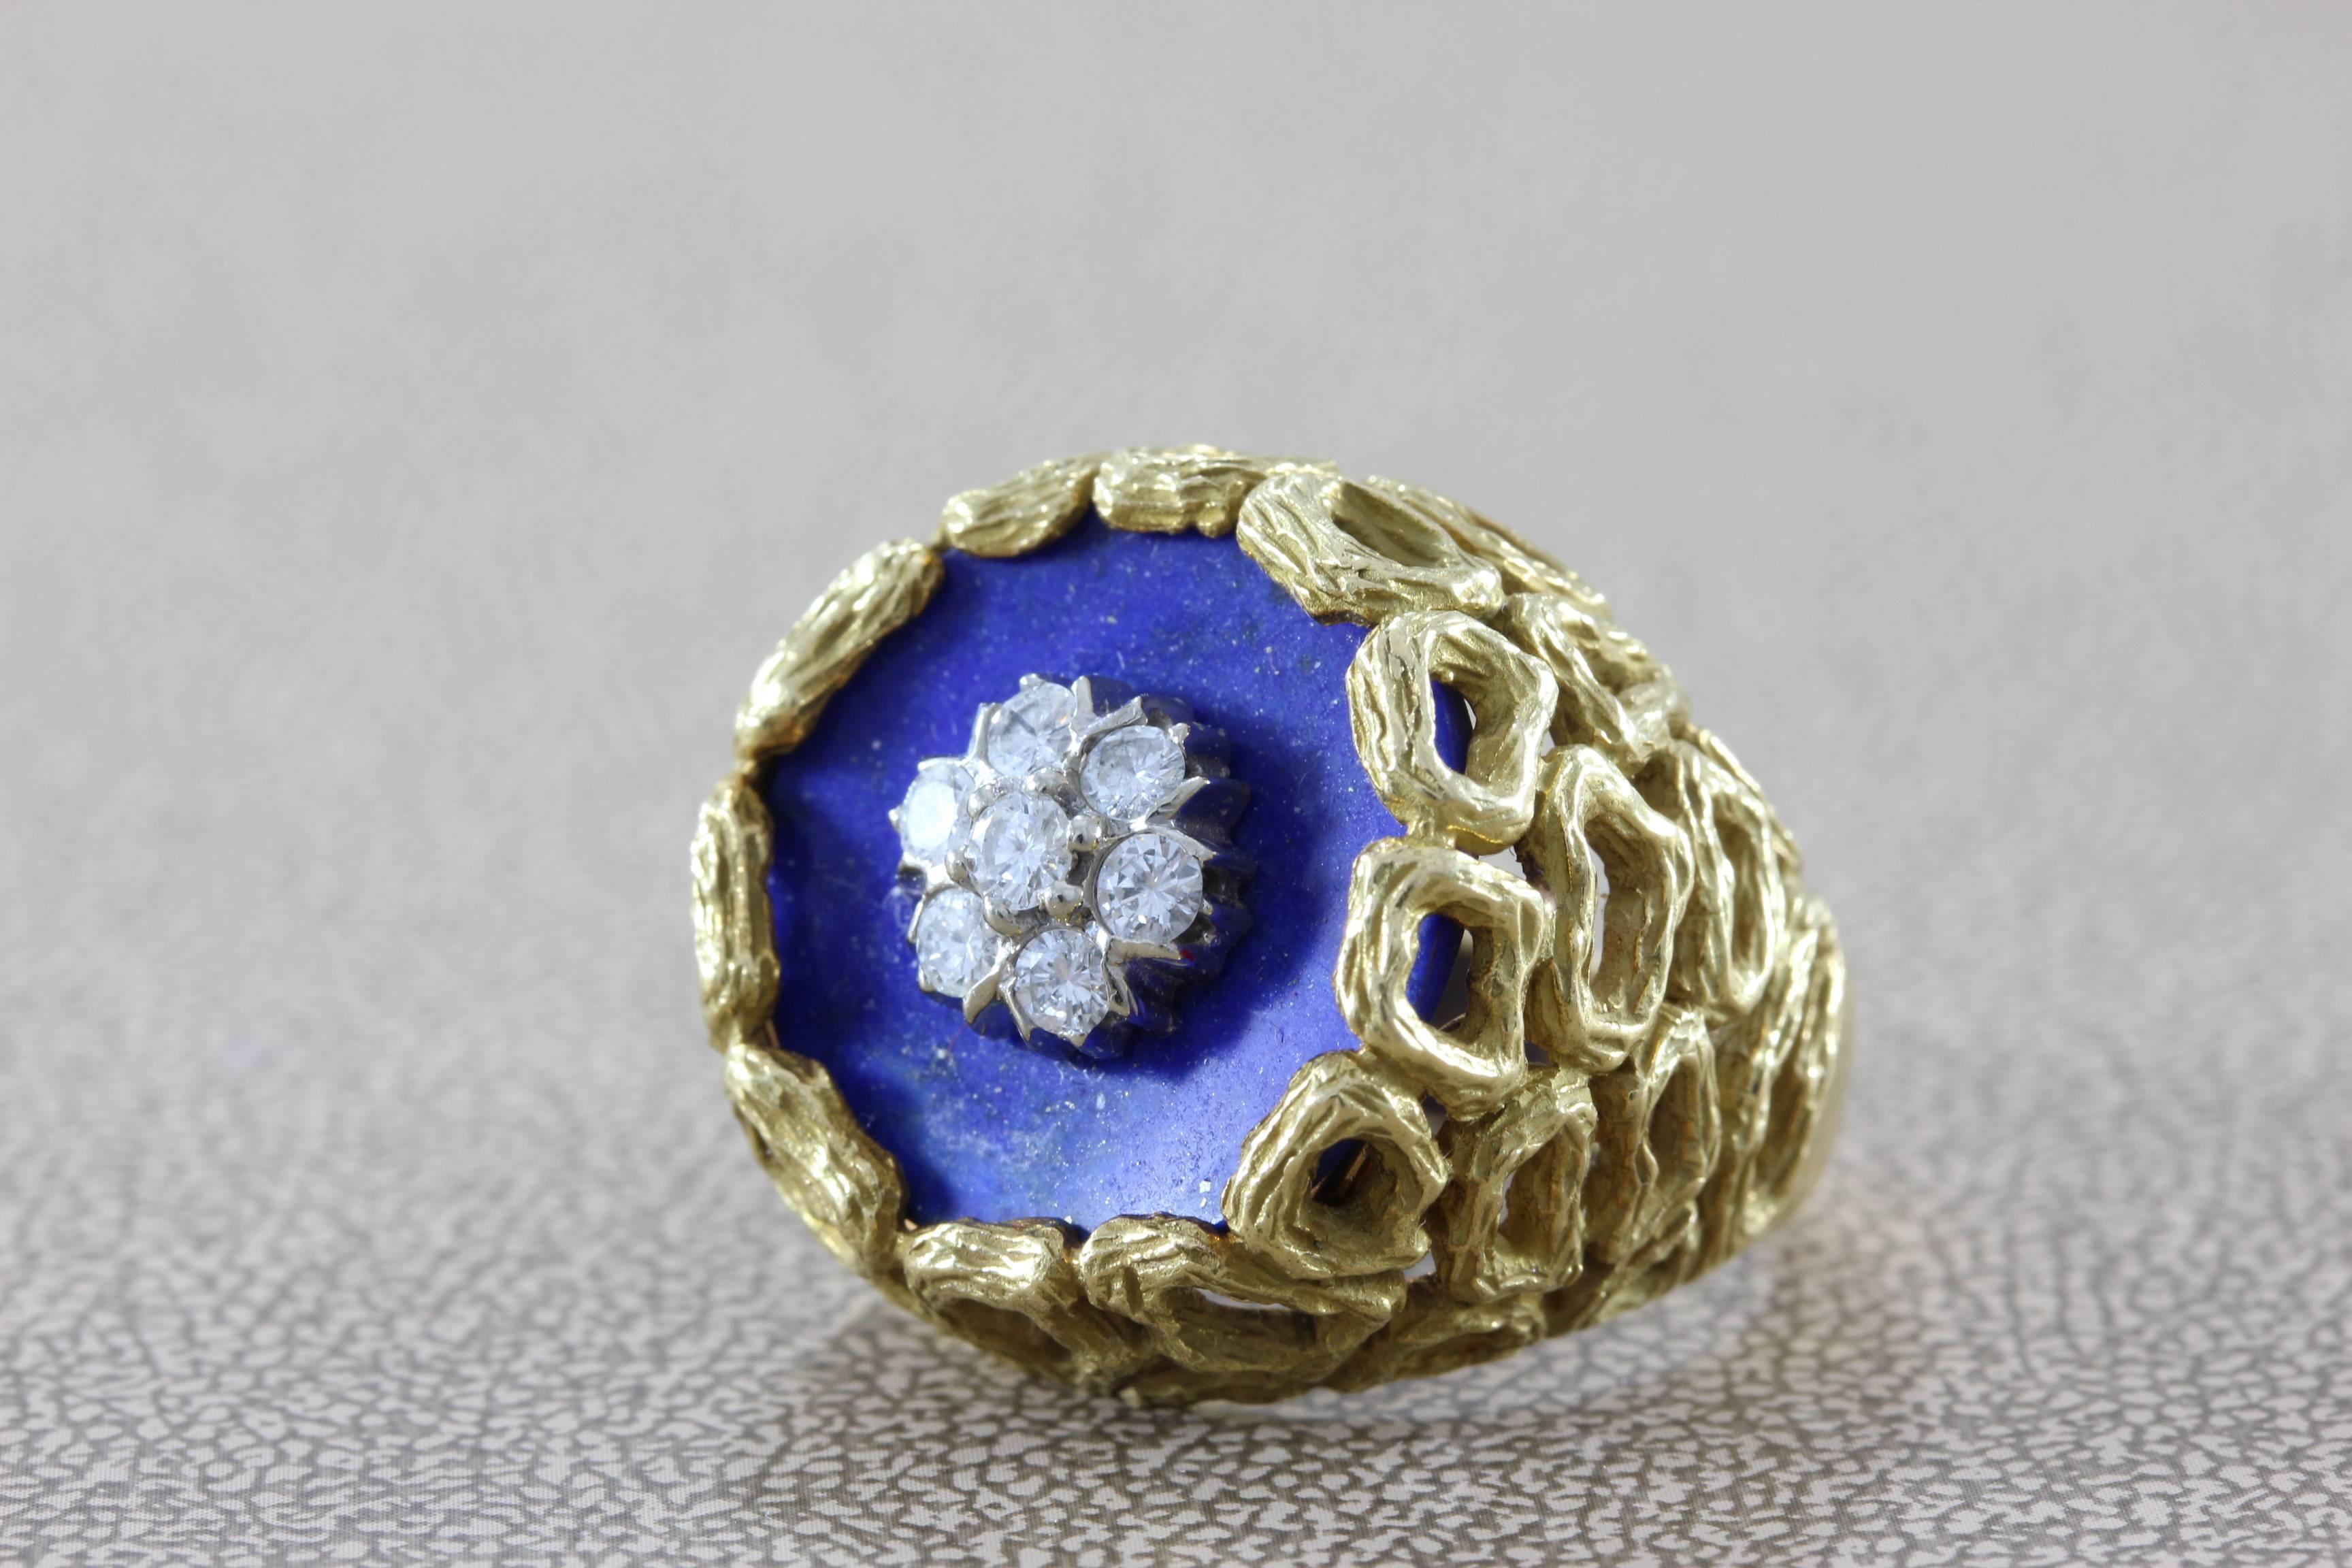 The detail work on this vintage ring is exceptional.  It features 0.40 carats of diamonds clustered on top of a vibrant blue lapis lazuli stone.  The 18K yellow gold ring shank is masterfully crafted with a hollow detail finish that you can only